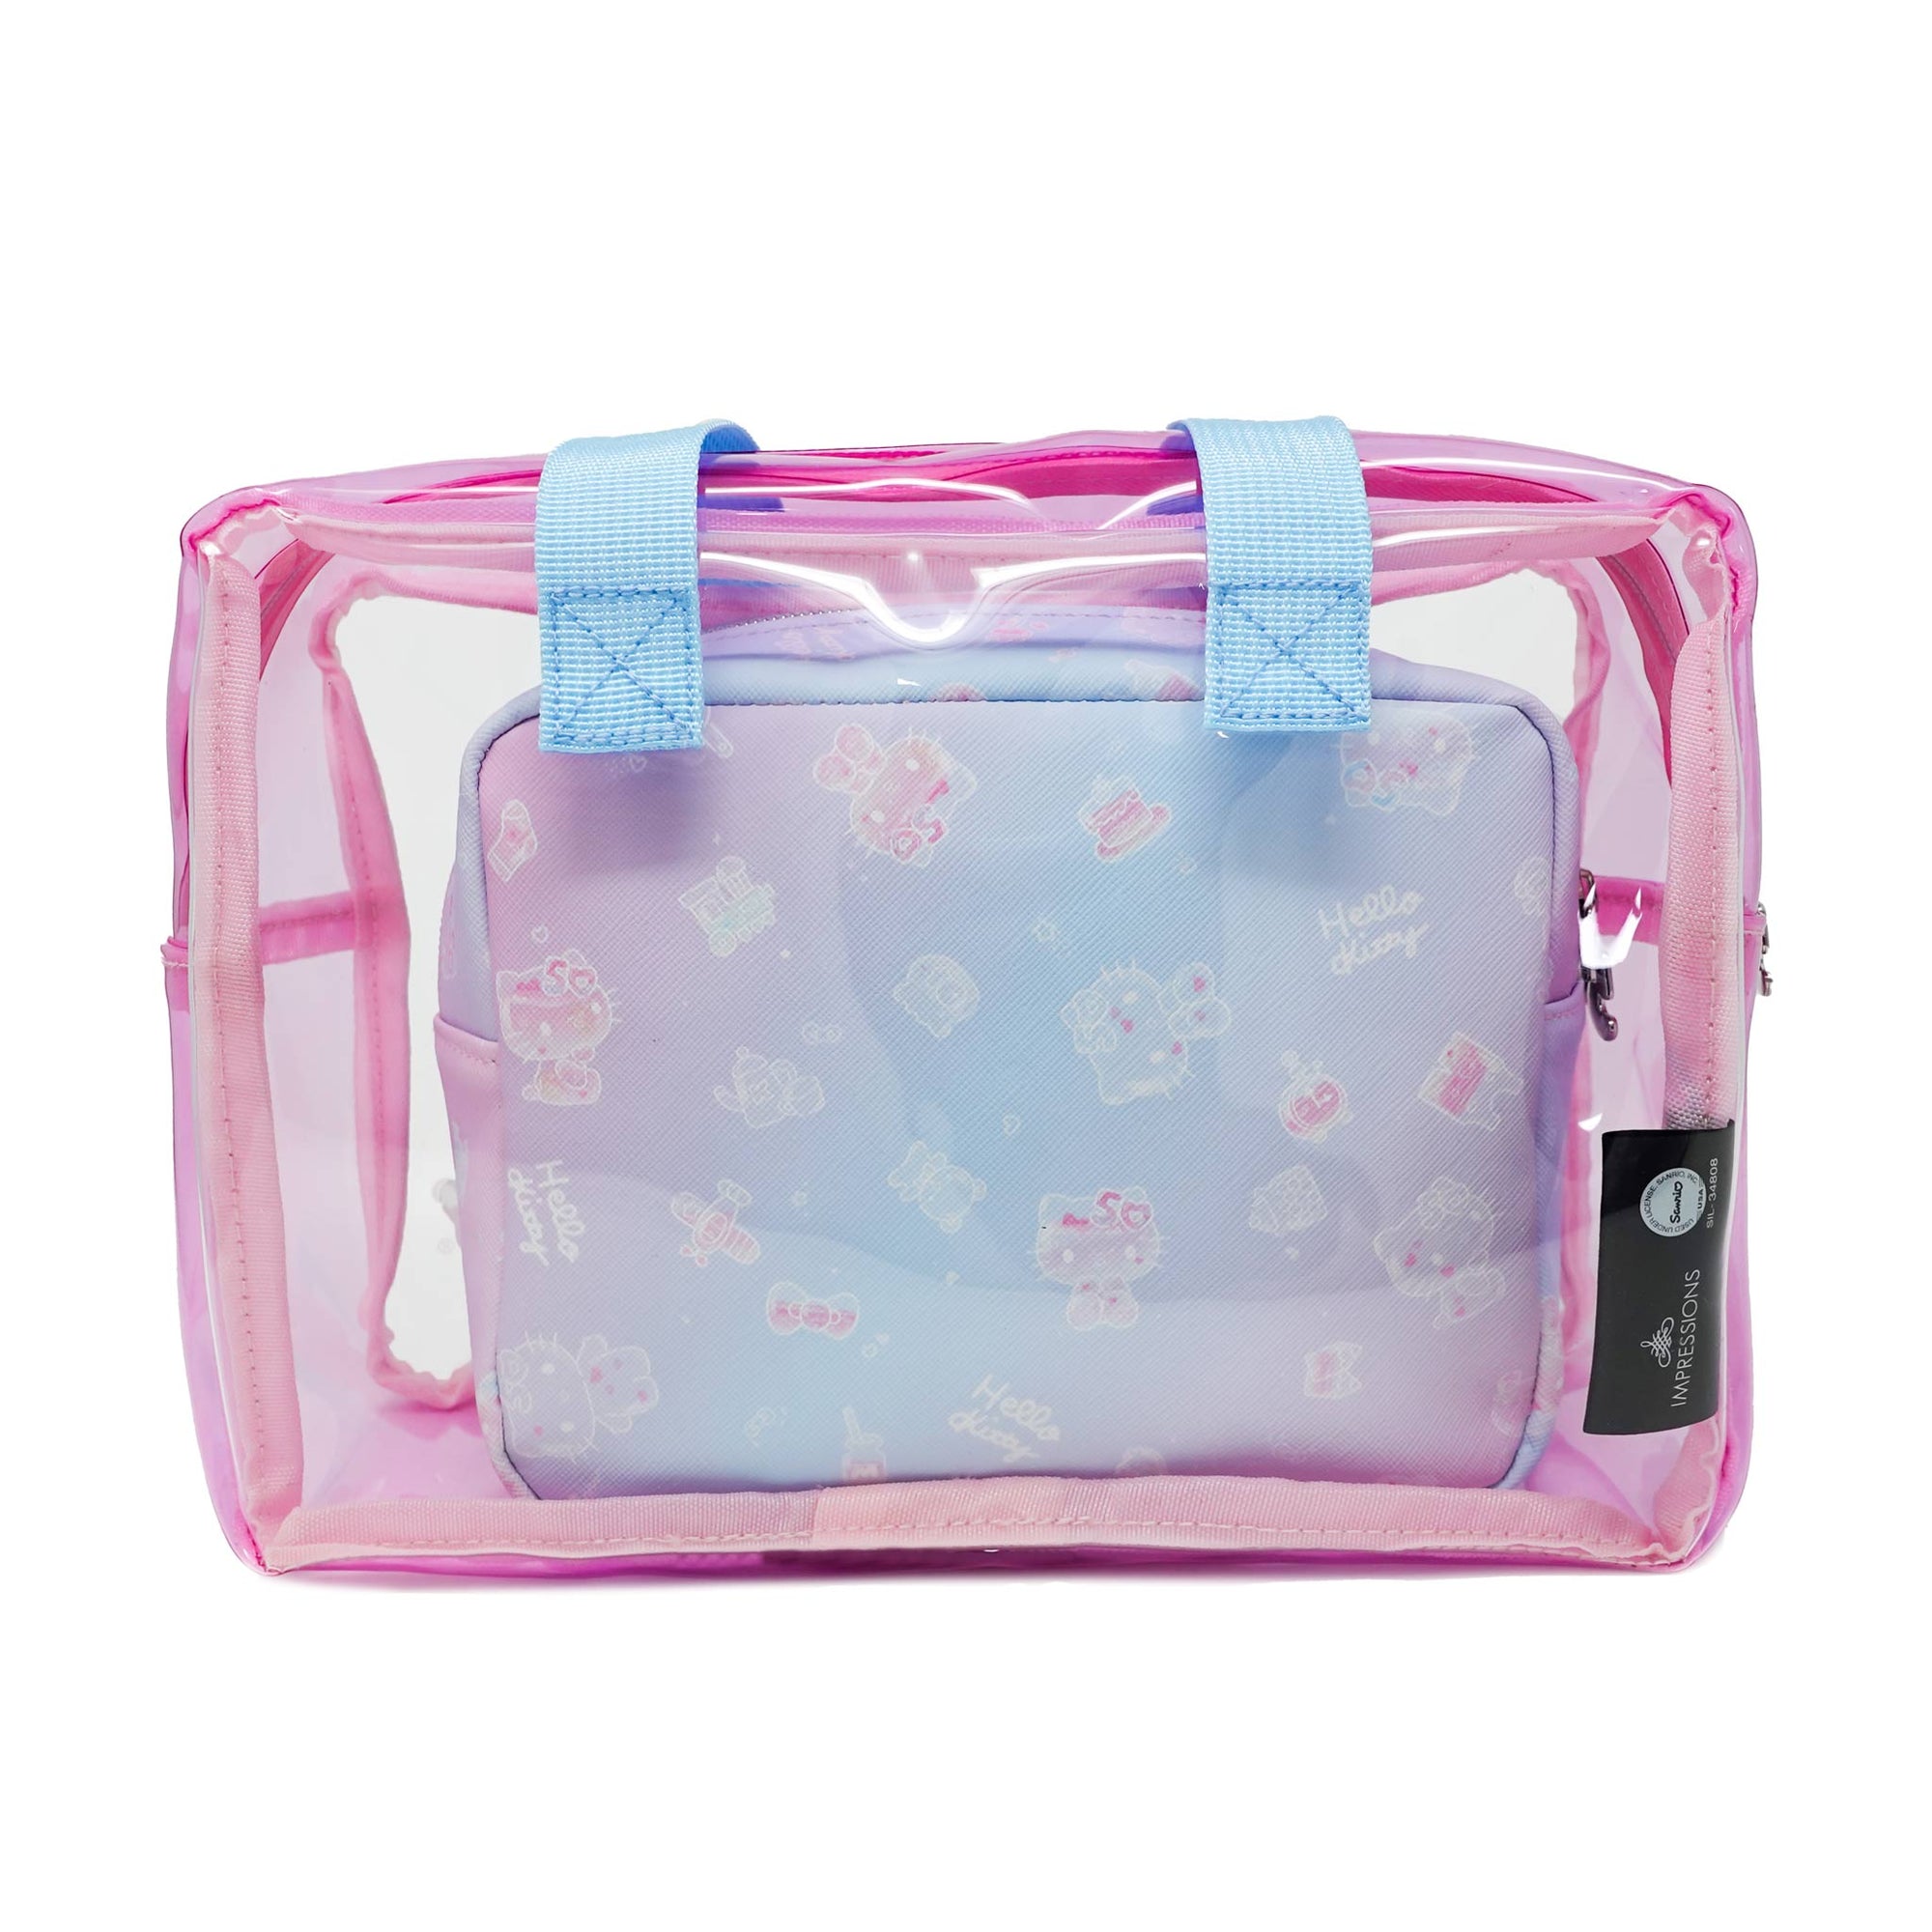 Hello Kitty x Impressions Vanity 50th Anniv. Clutch Set Makeup Travel Cases Impressions Vanity Co.   